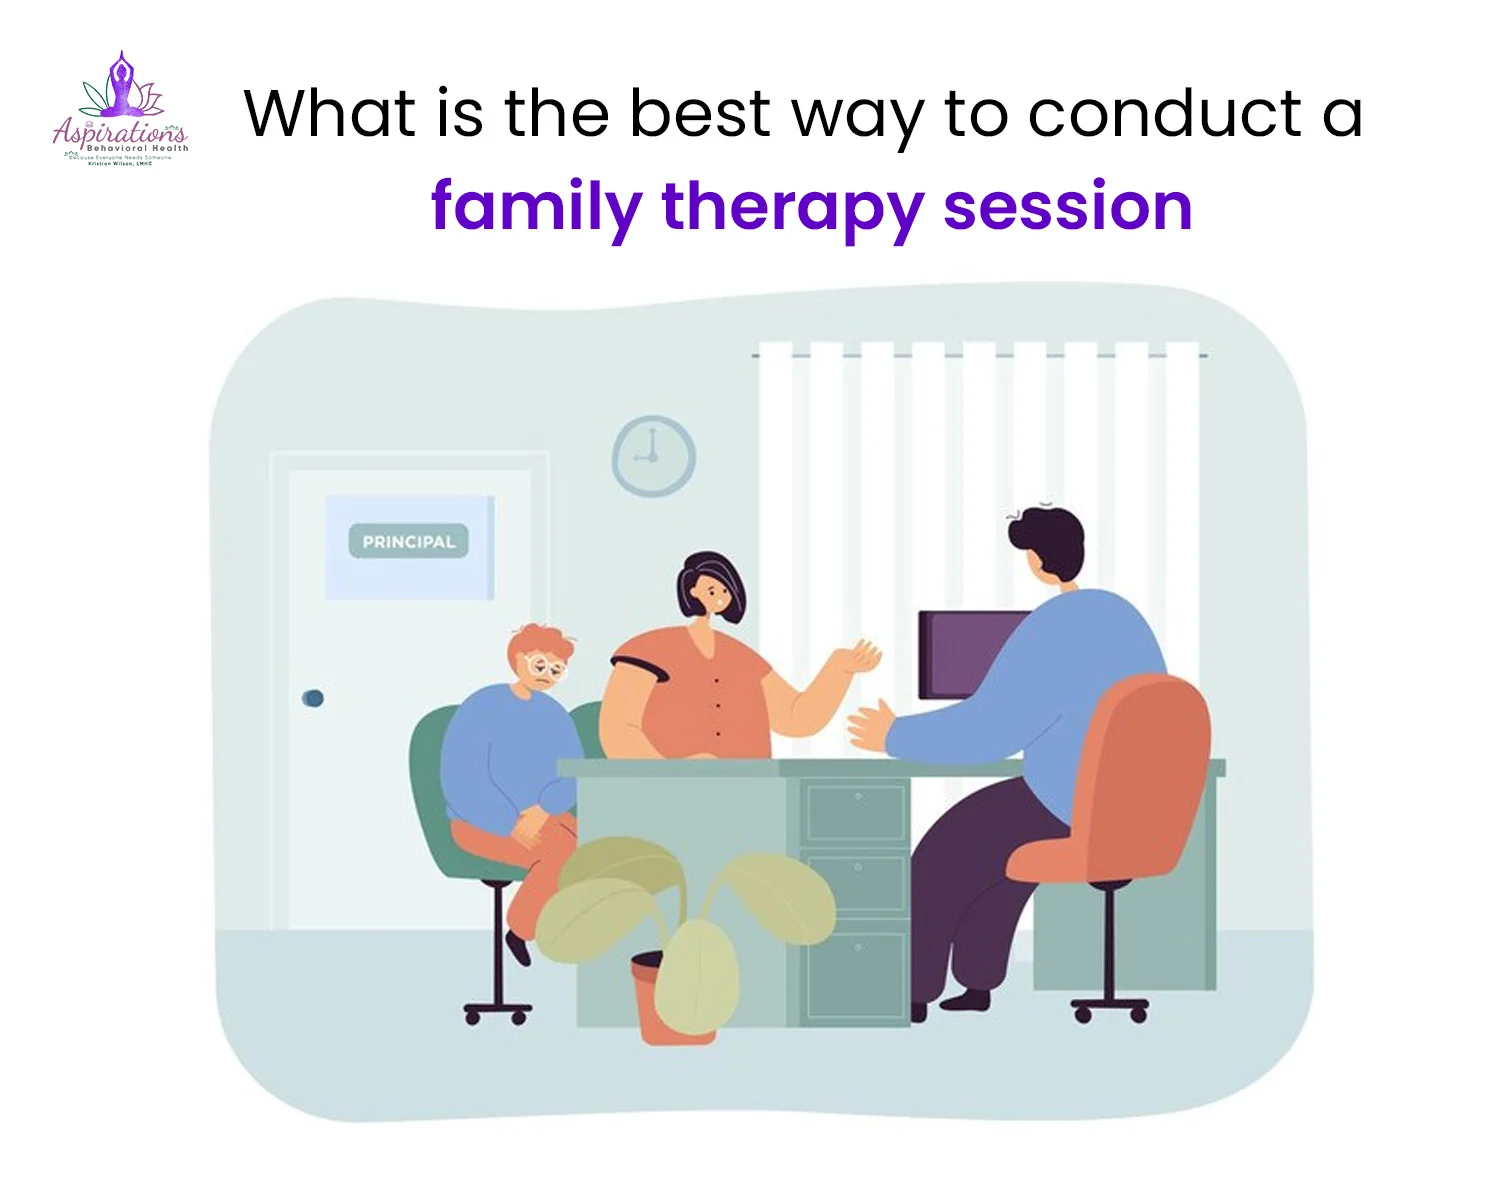 What is the best way to conduct a family therapy session? 